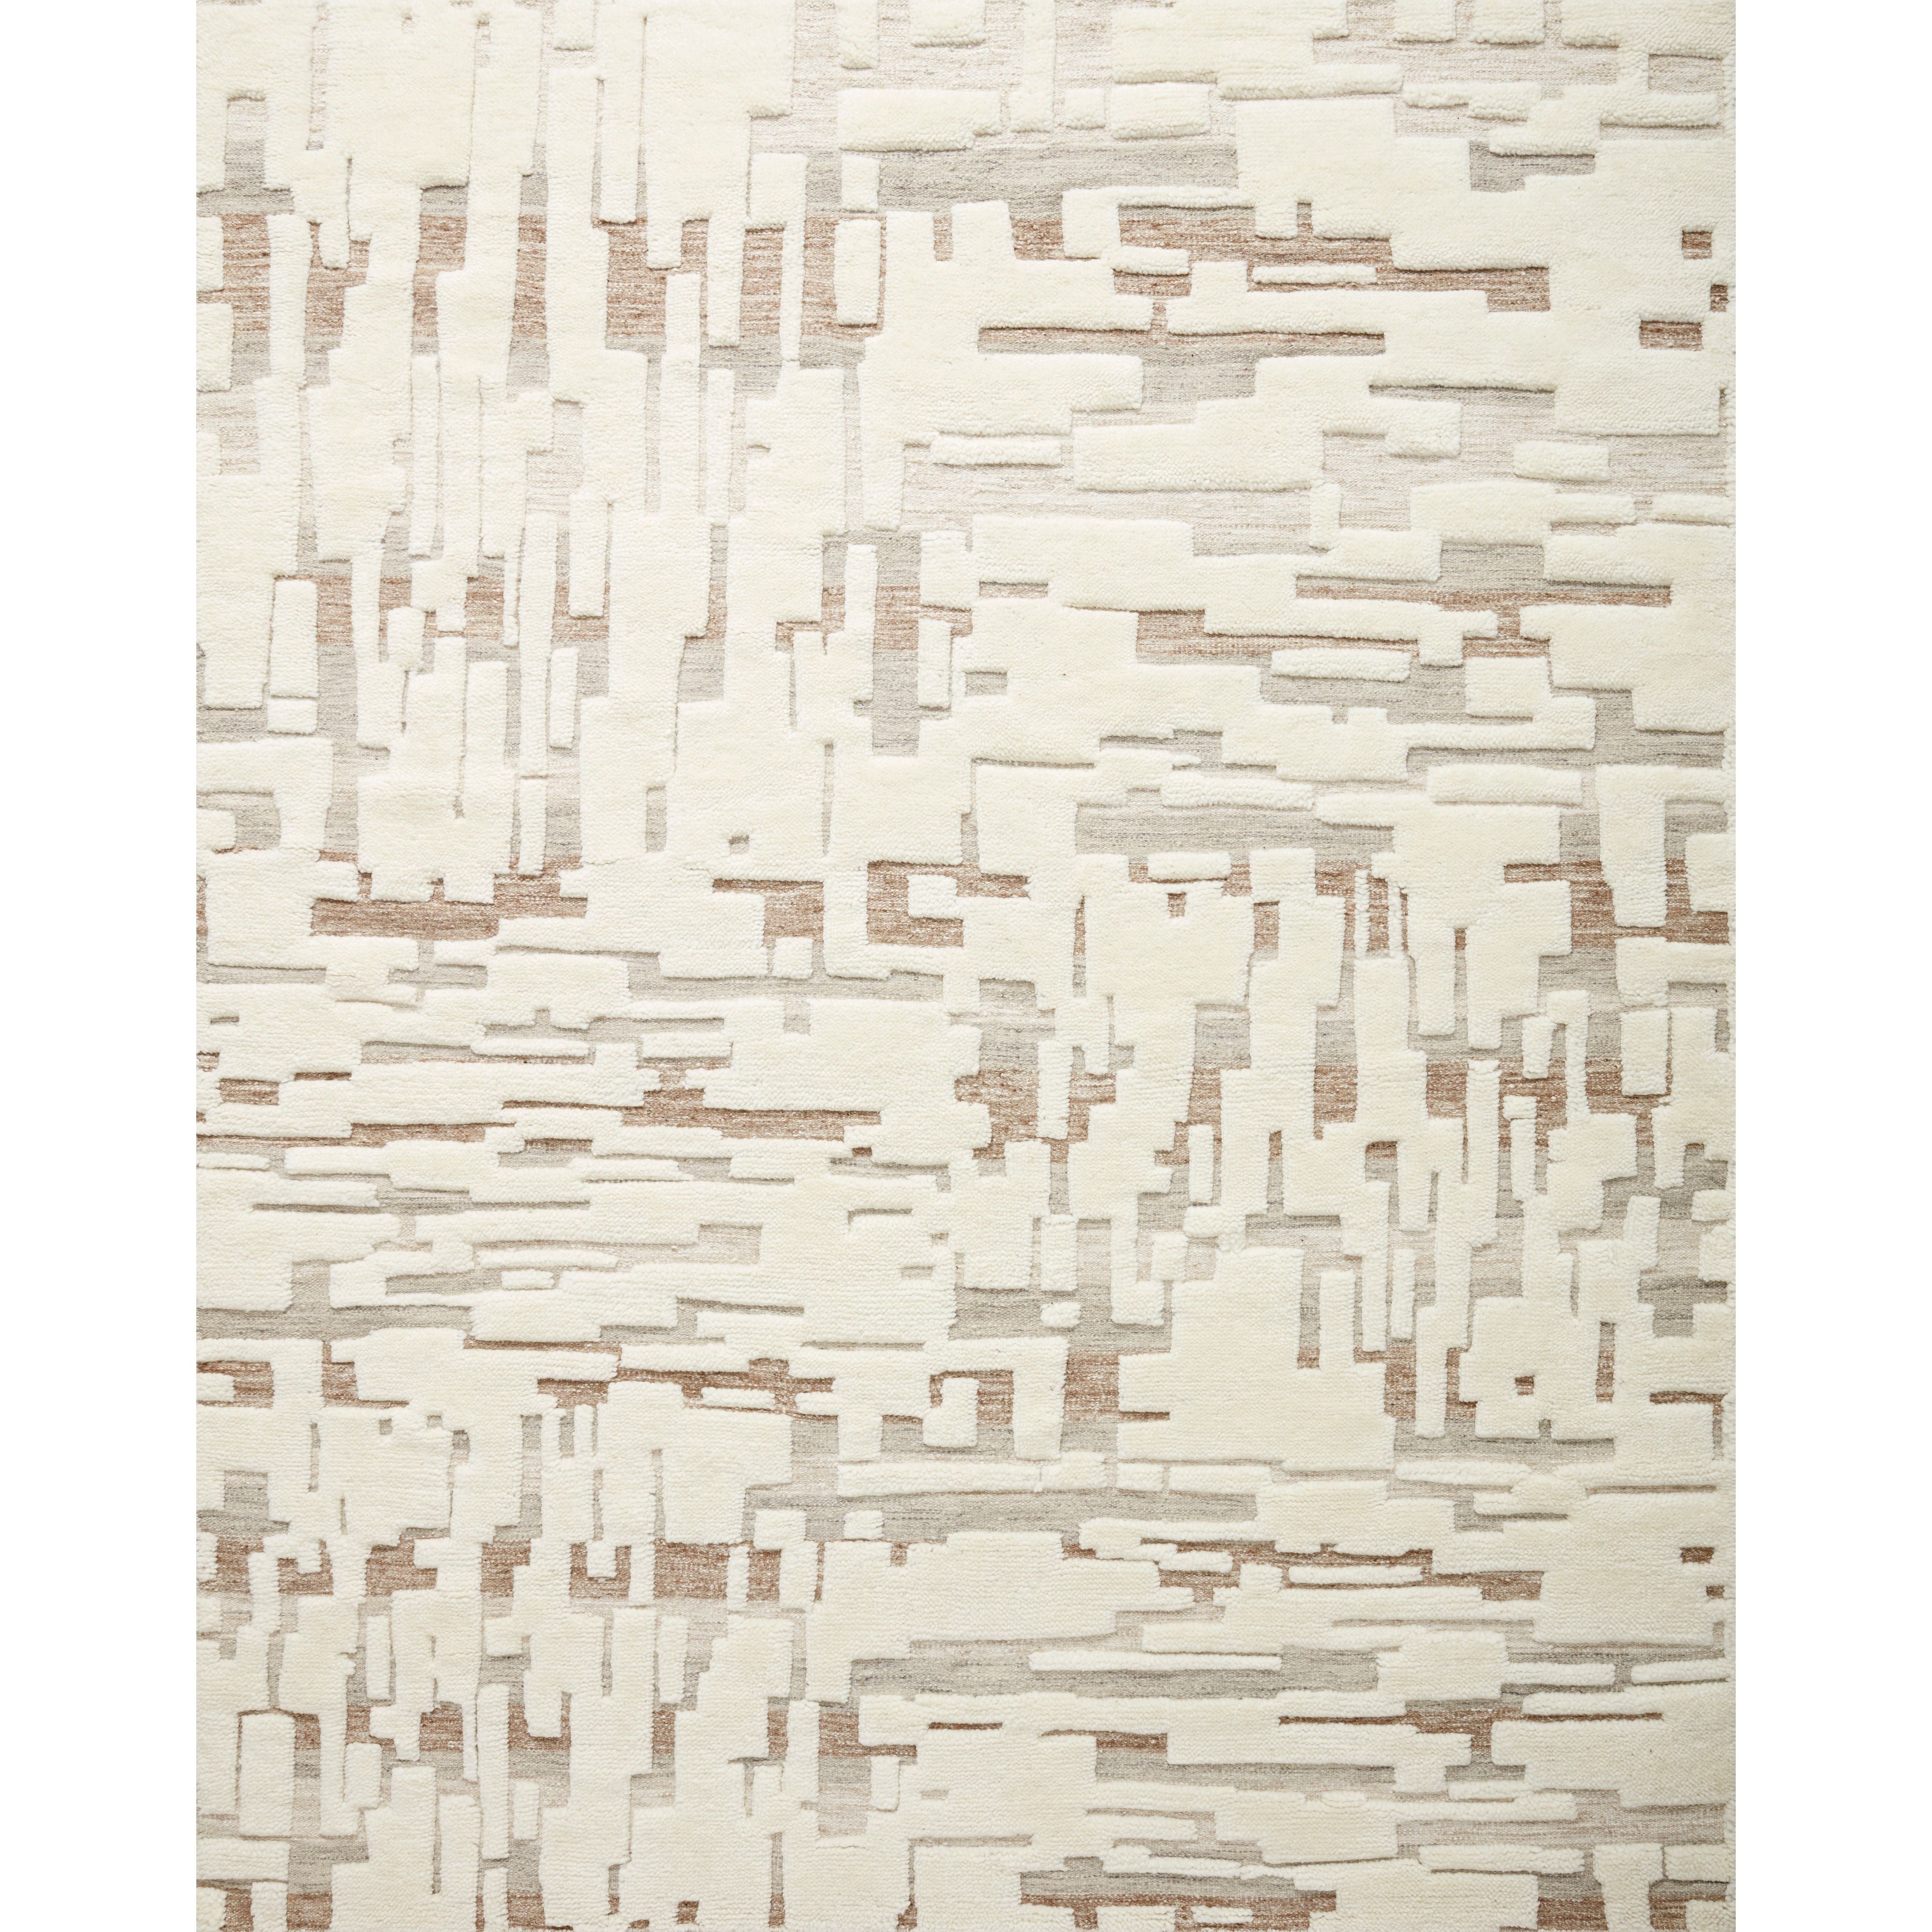 The Loloi Bennett Ivory / Taupe Area Rug, or BEN-05, is hand-knotted of wool, viscose and polyester in India. Featuring a new carve like high-low pile, Bennett has an ivory base with abstract tonal designs. Plus, it's plush underfoot-- a great choice for your office, bedroom, or other medium traffic areas. 